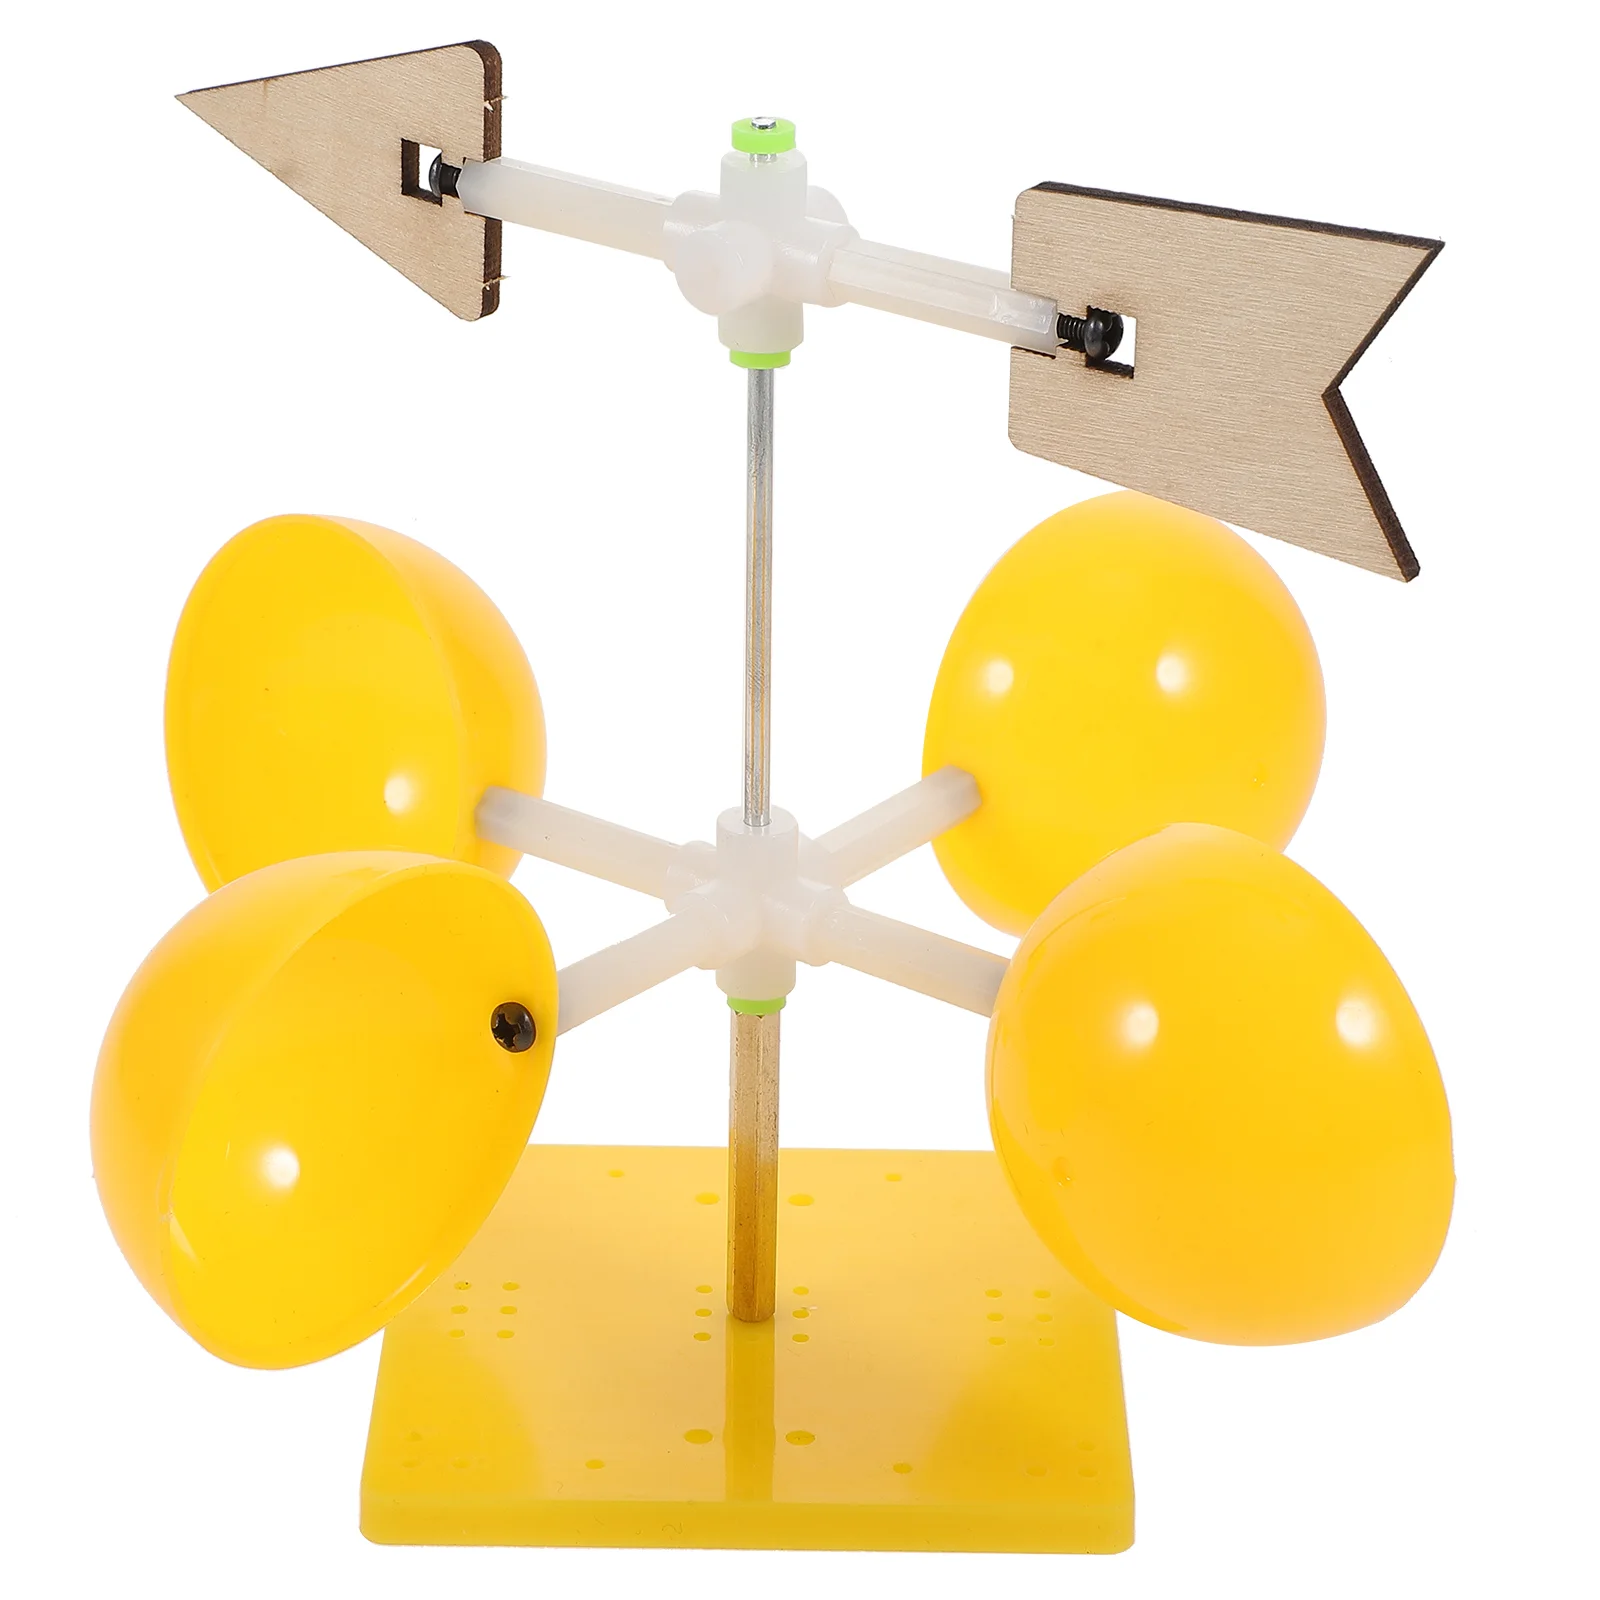 

Weather Wind Vane Kids Science Toy Kit Toys Station Vanes Diy Assembly Weathervane Model Windmill Indicator Tools Scientific